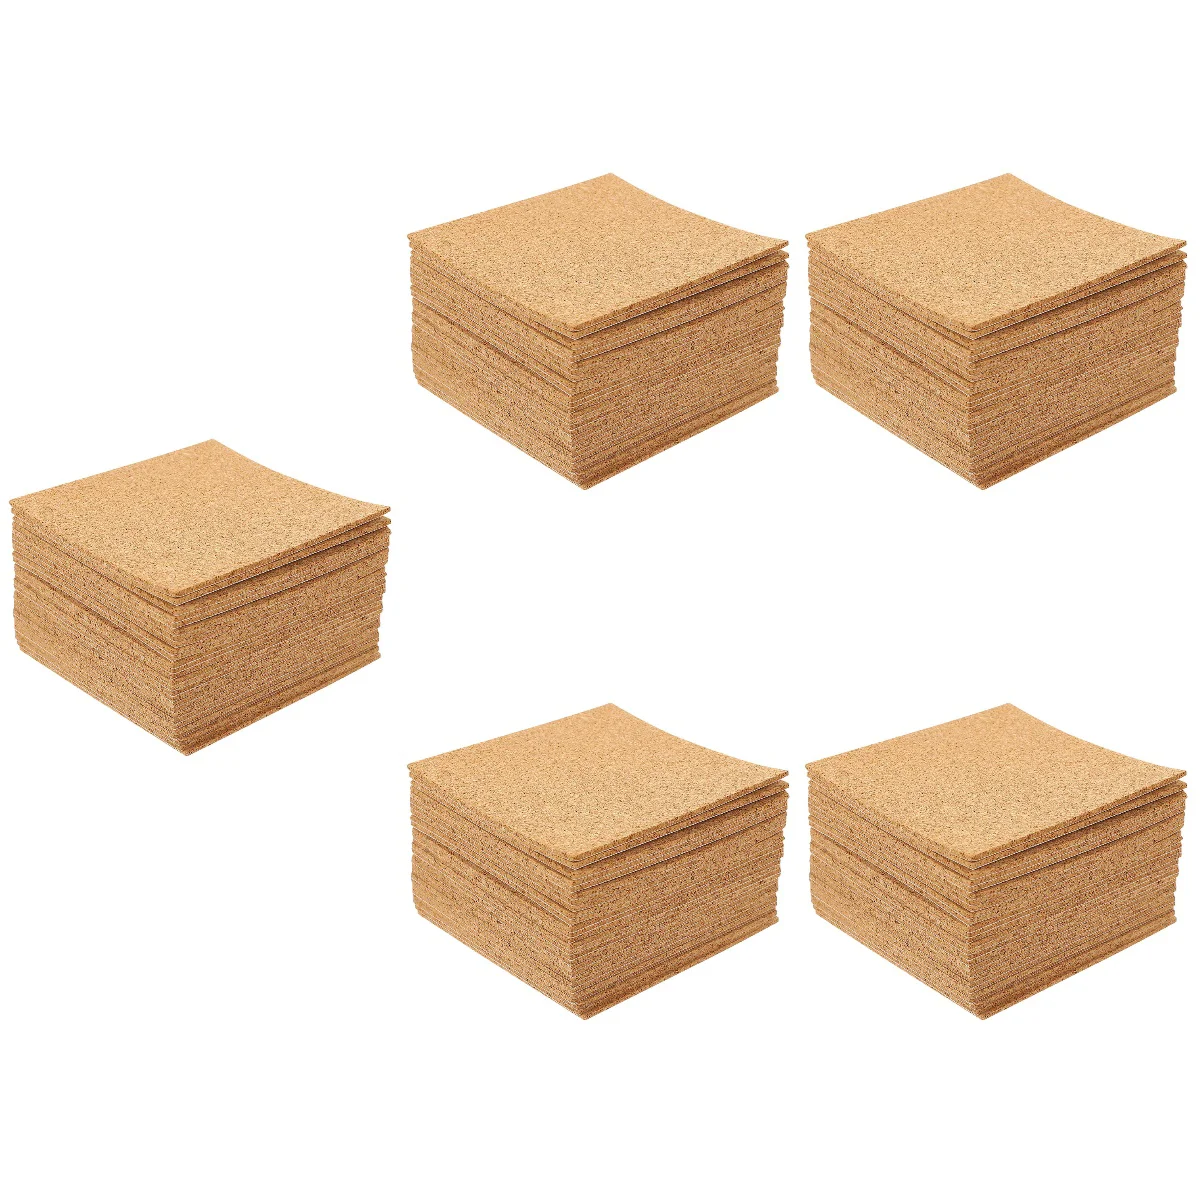 

Self-adhesive Cork Pad Square Sheets Backing DIY Projects Squares Coaster Round Bed